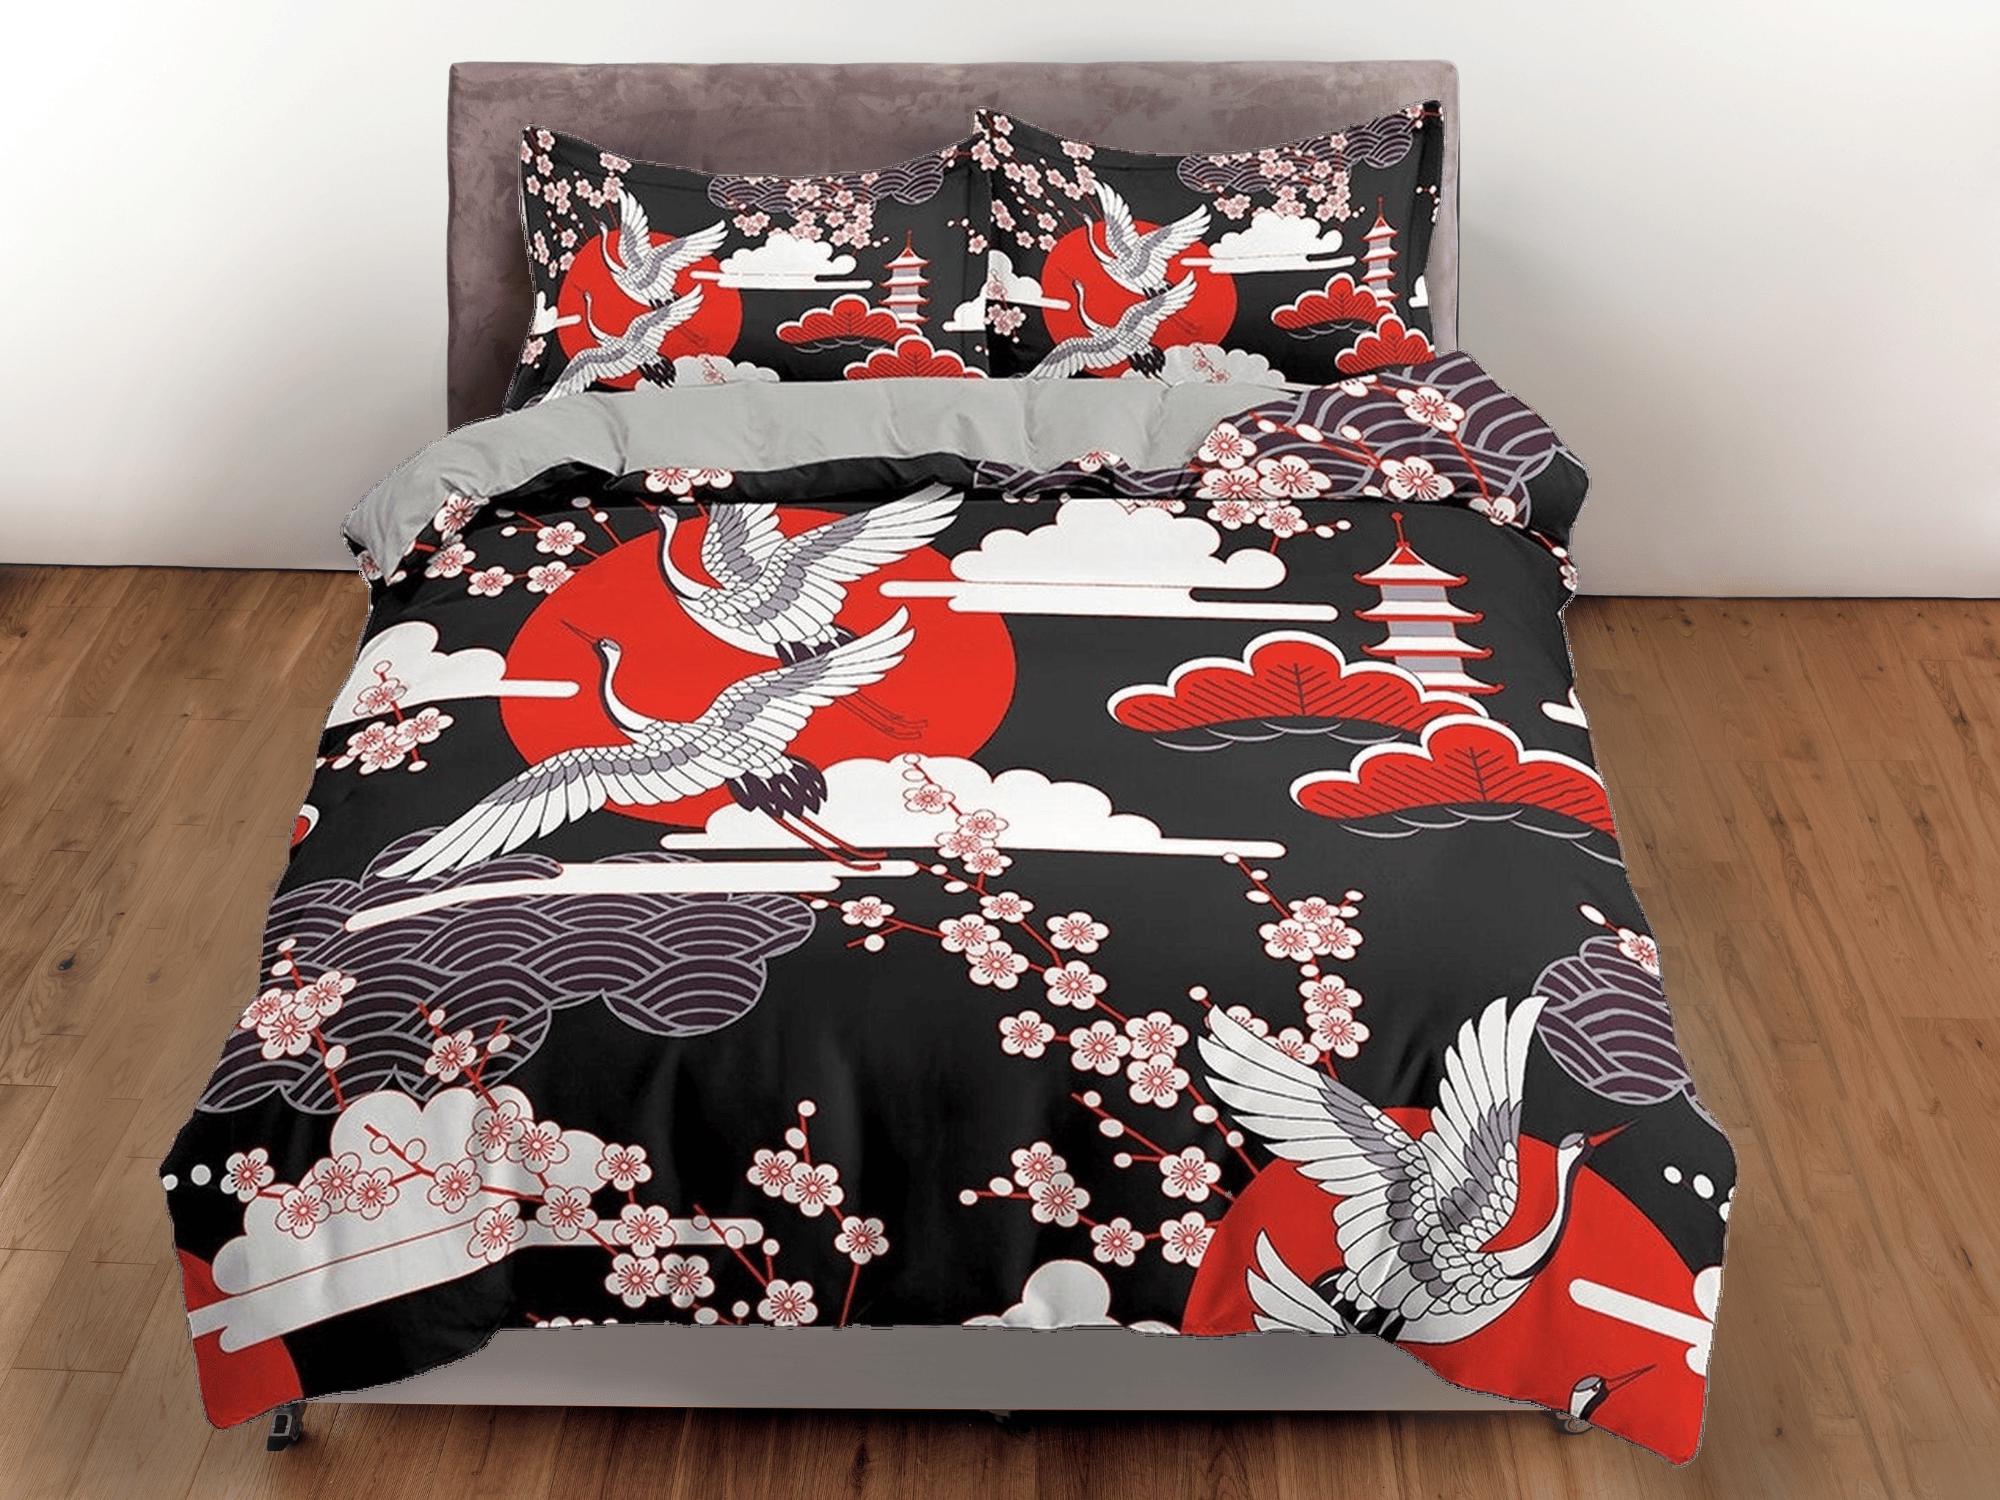 daintyduvet Black and red oriental bedding set cover, crane bird and cherry blossom prints on Japanese style duvet cover, king, queen, full, twin